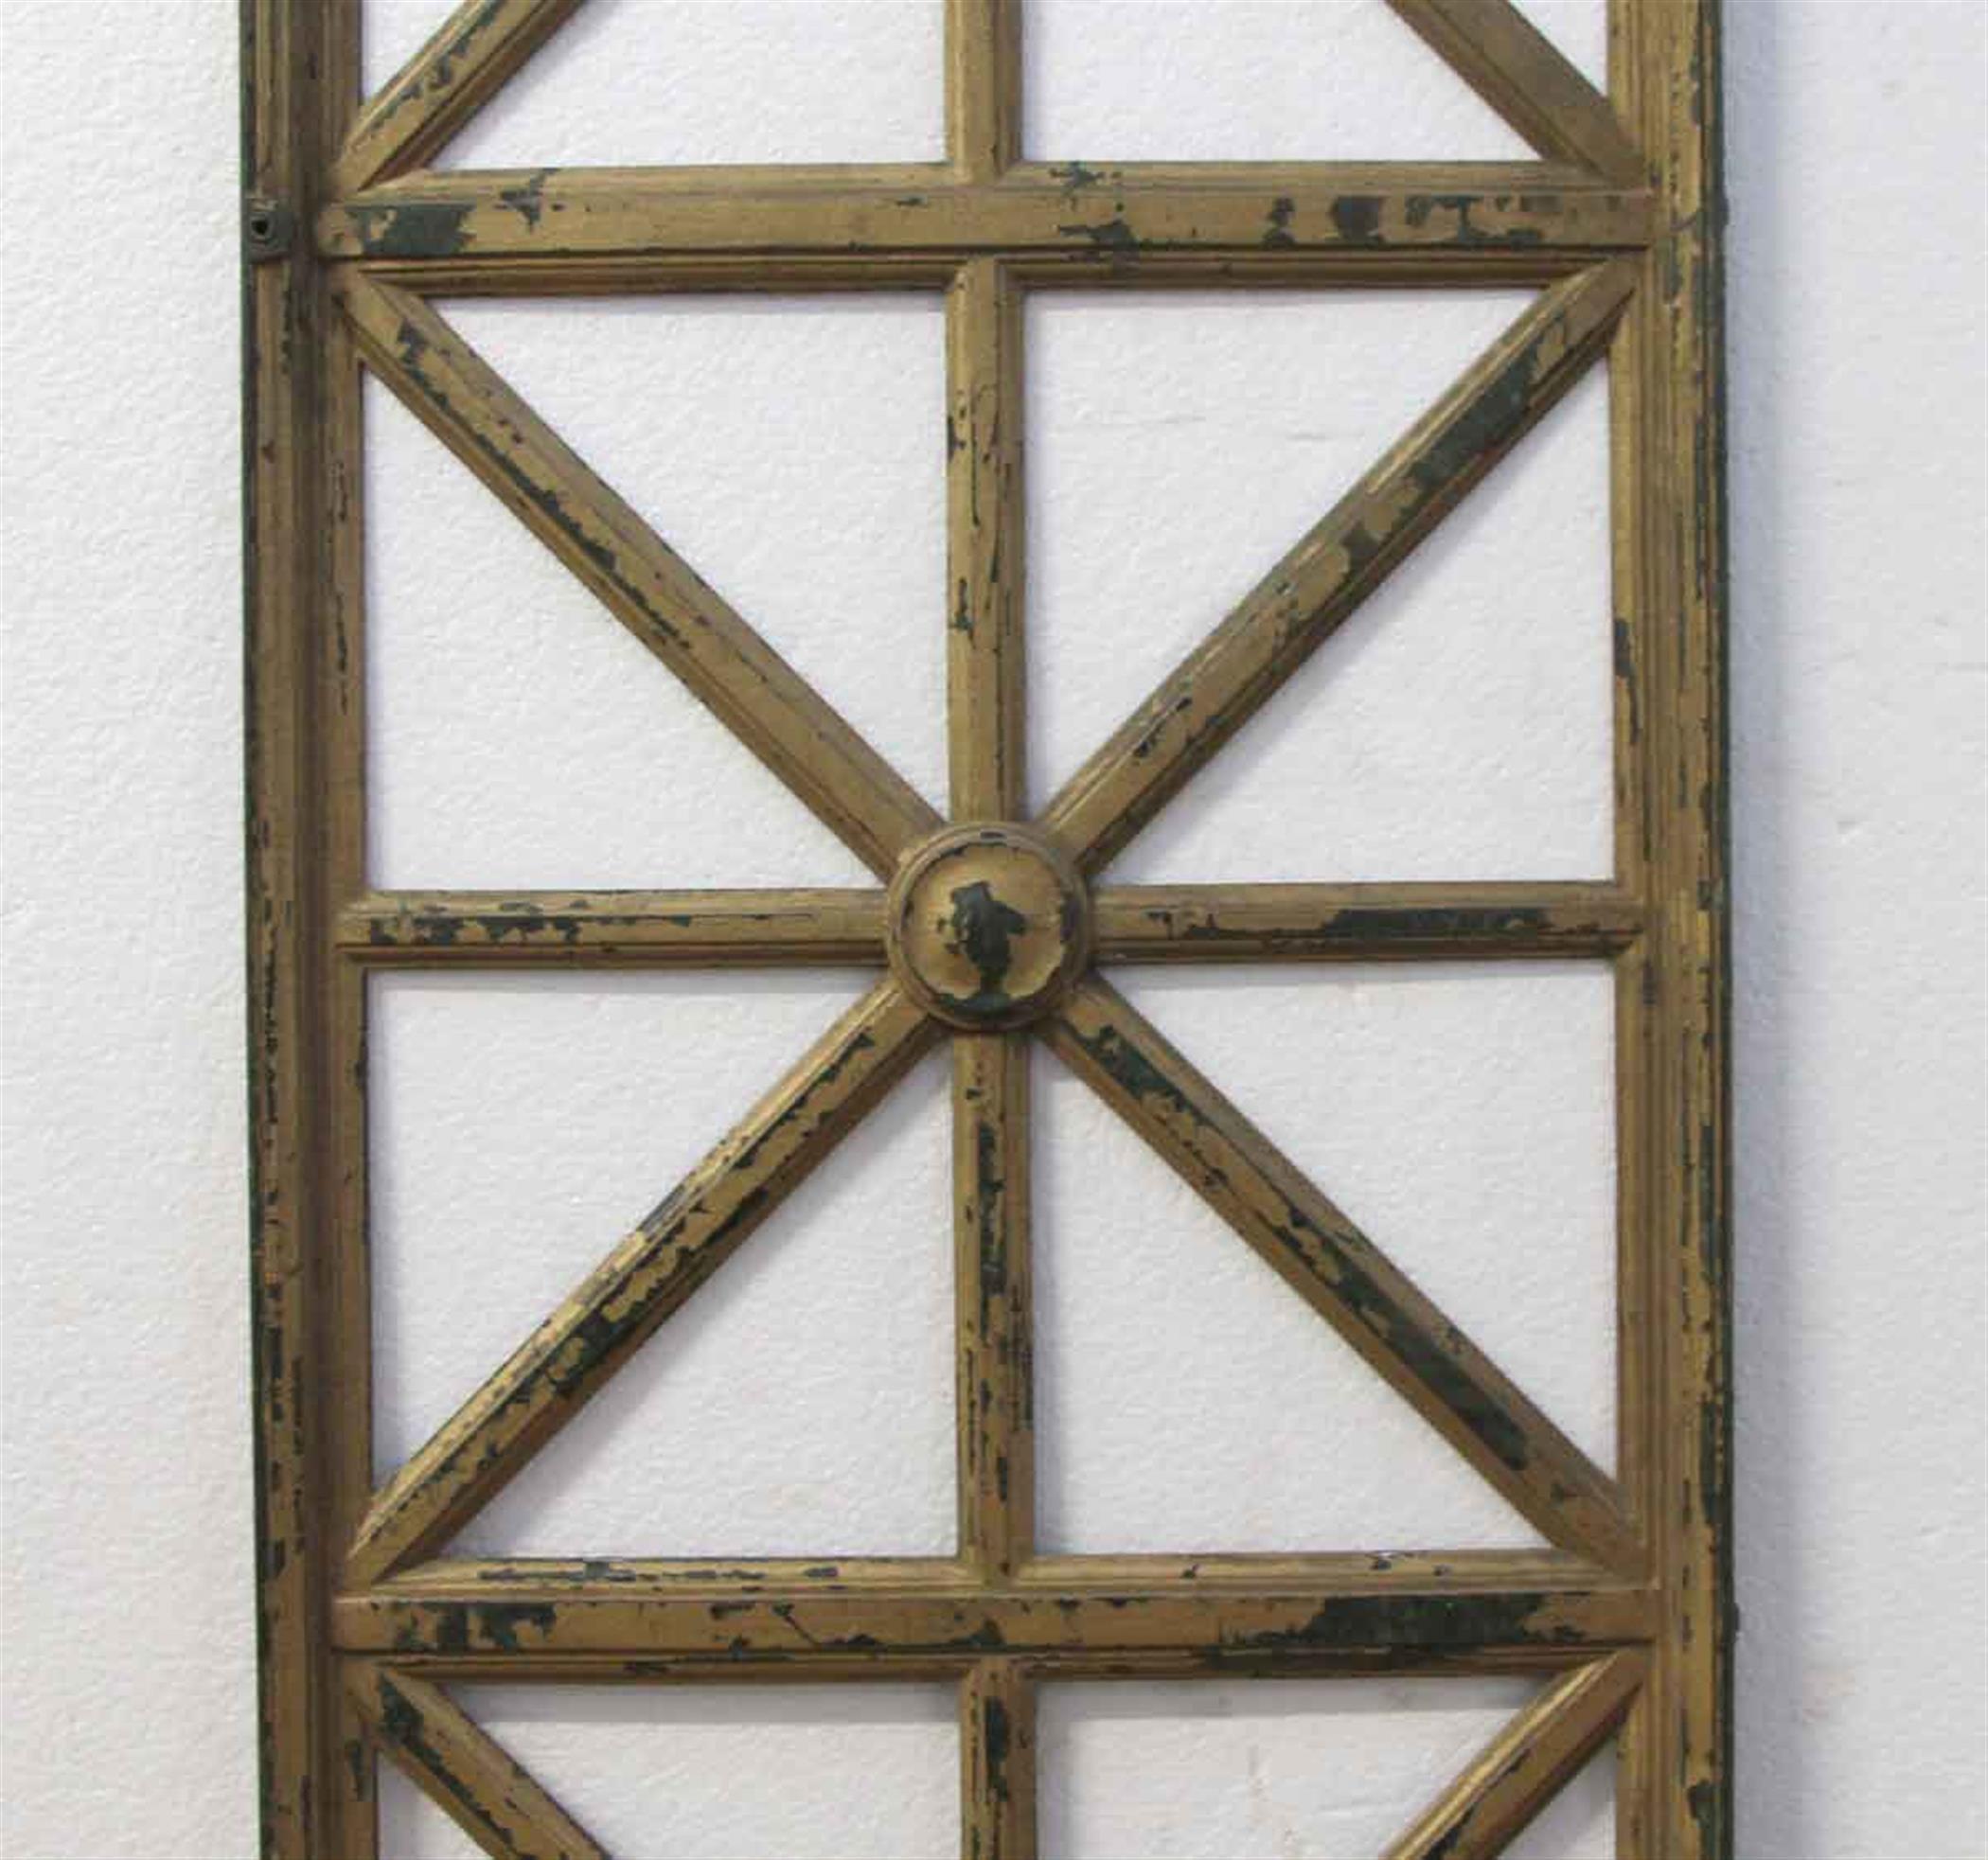 1930s geometric Art Deco decorative grate with center florets. Originally from a New York City bank elevator, this piece can be used as a door inset or transom. his can be seen at our 400 Gilligan St location in Scranton, PA.